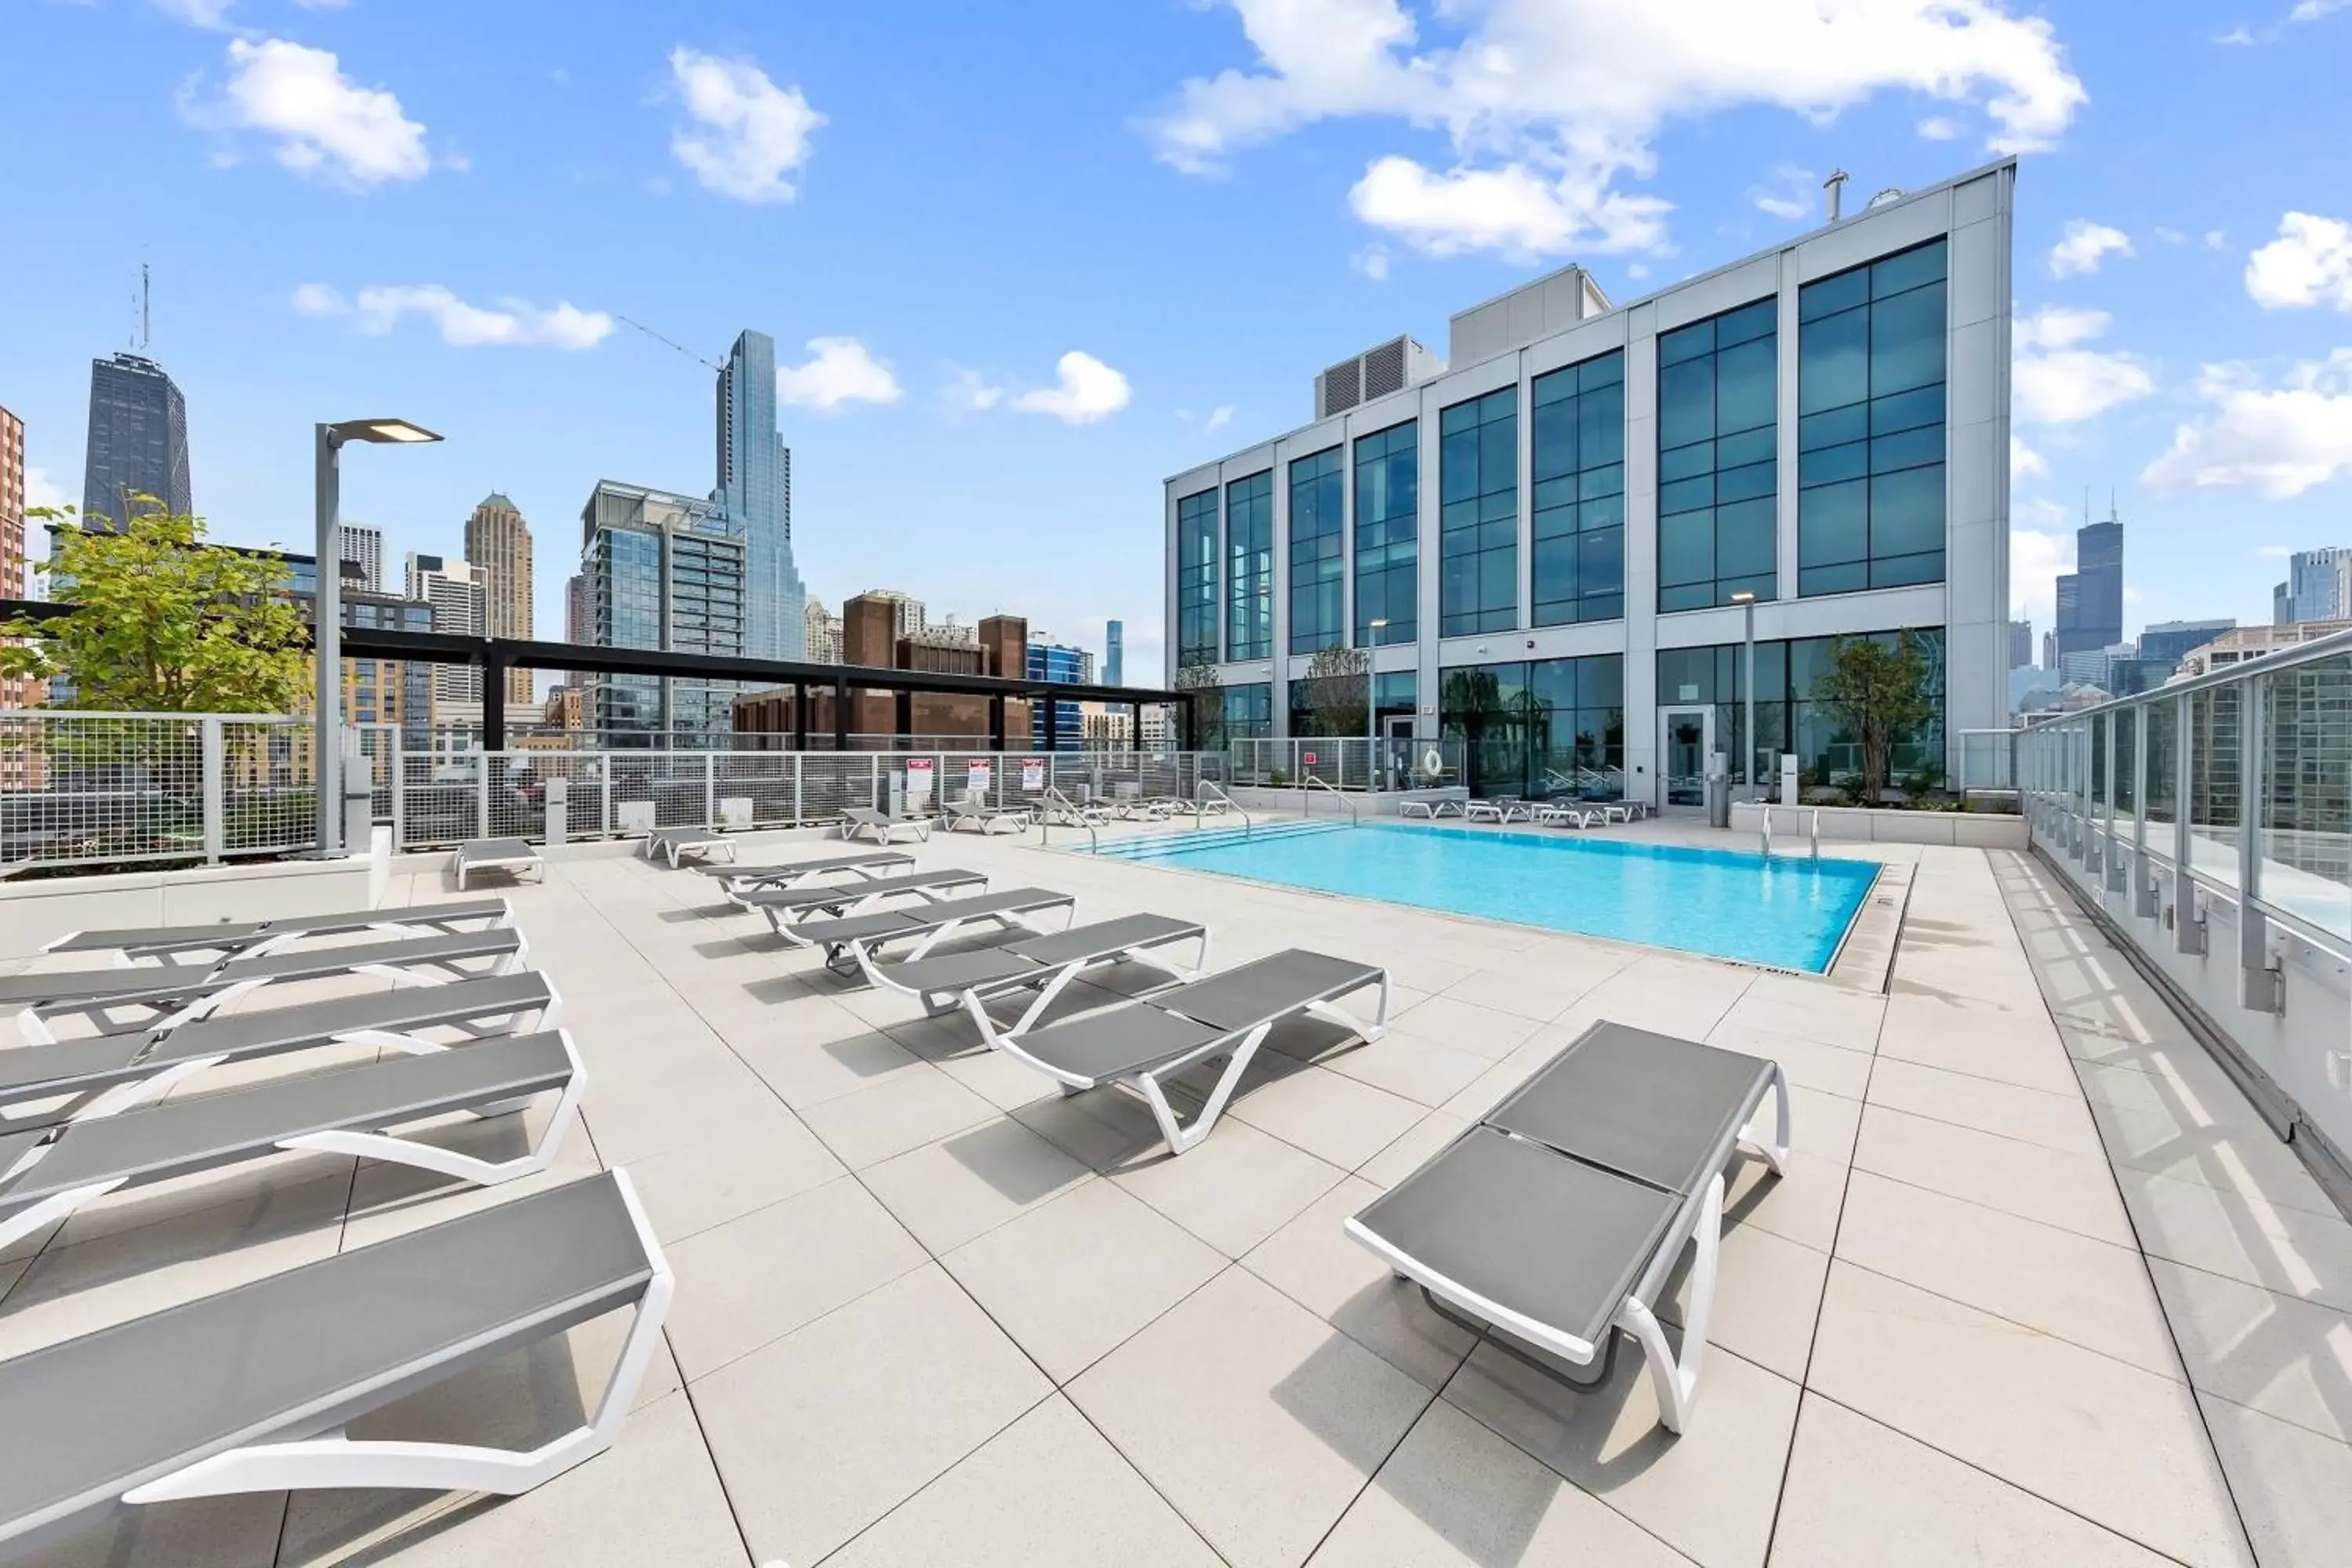 Swimming Pool in Kasa River North Chicago